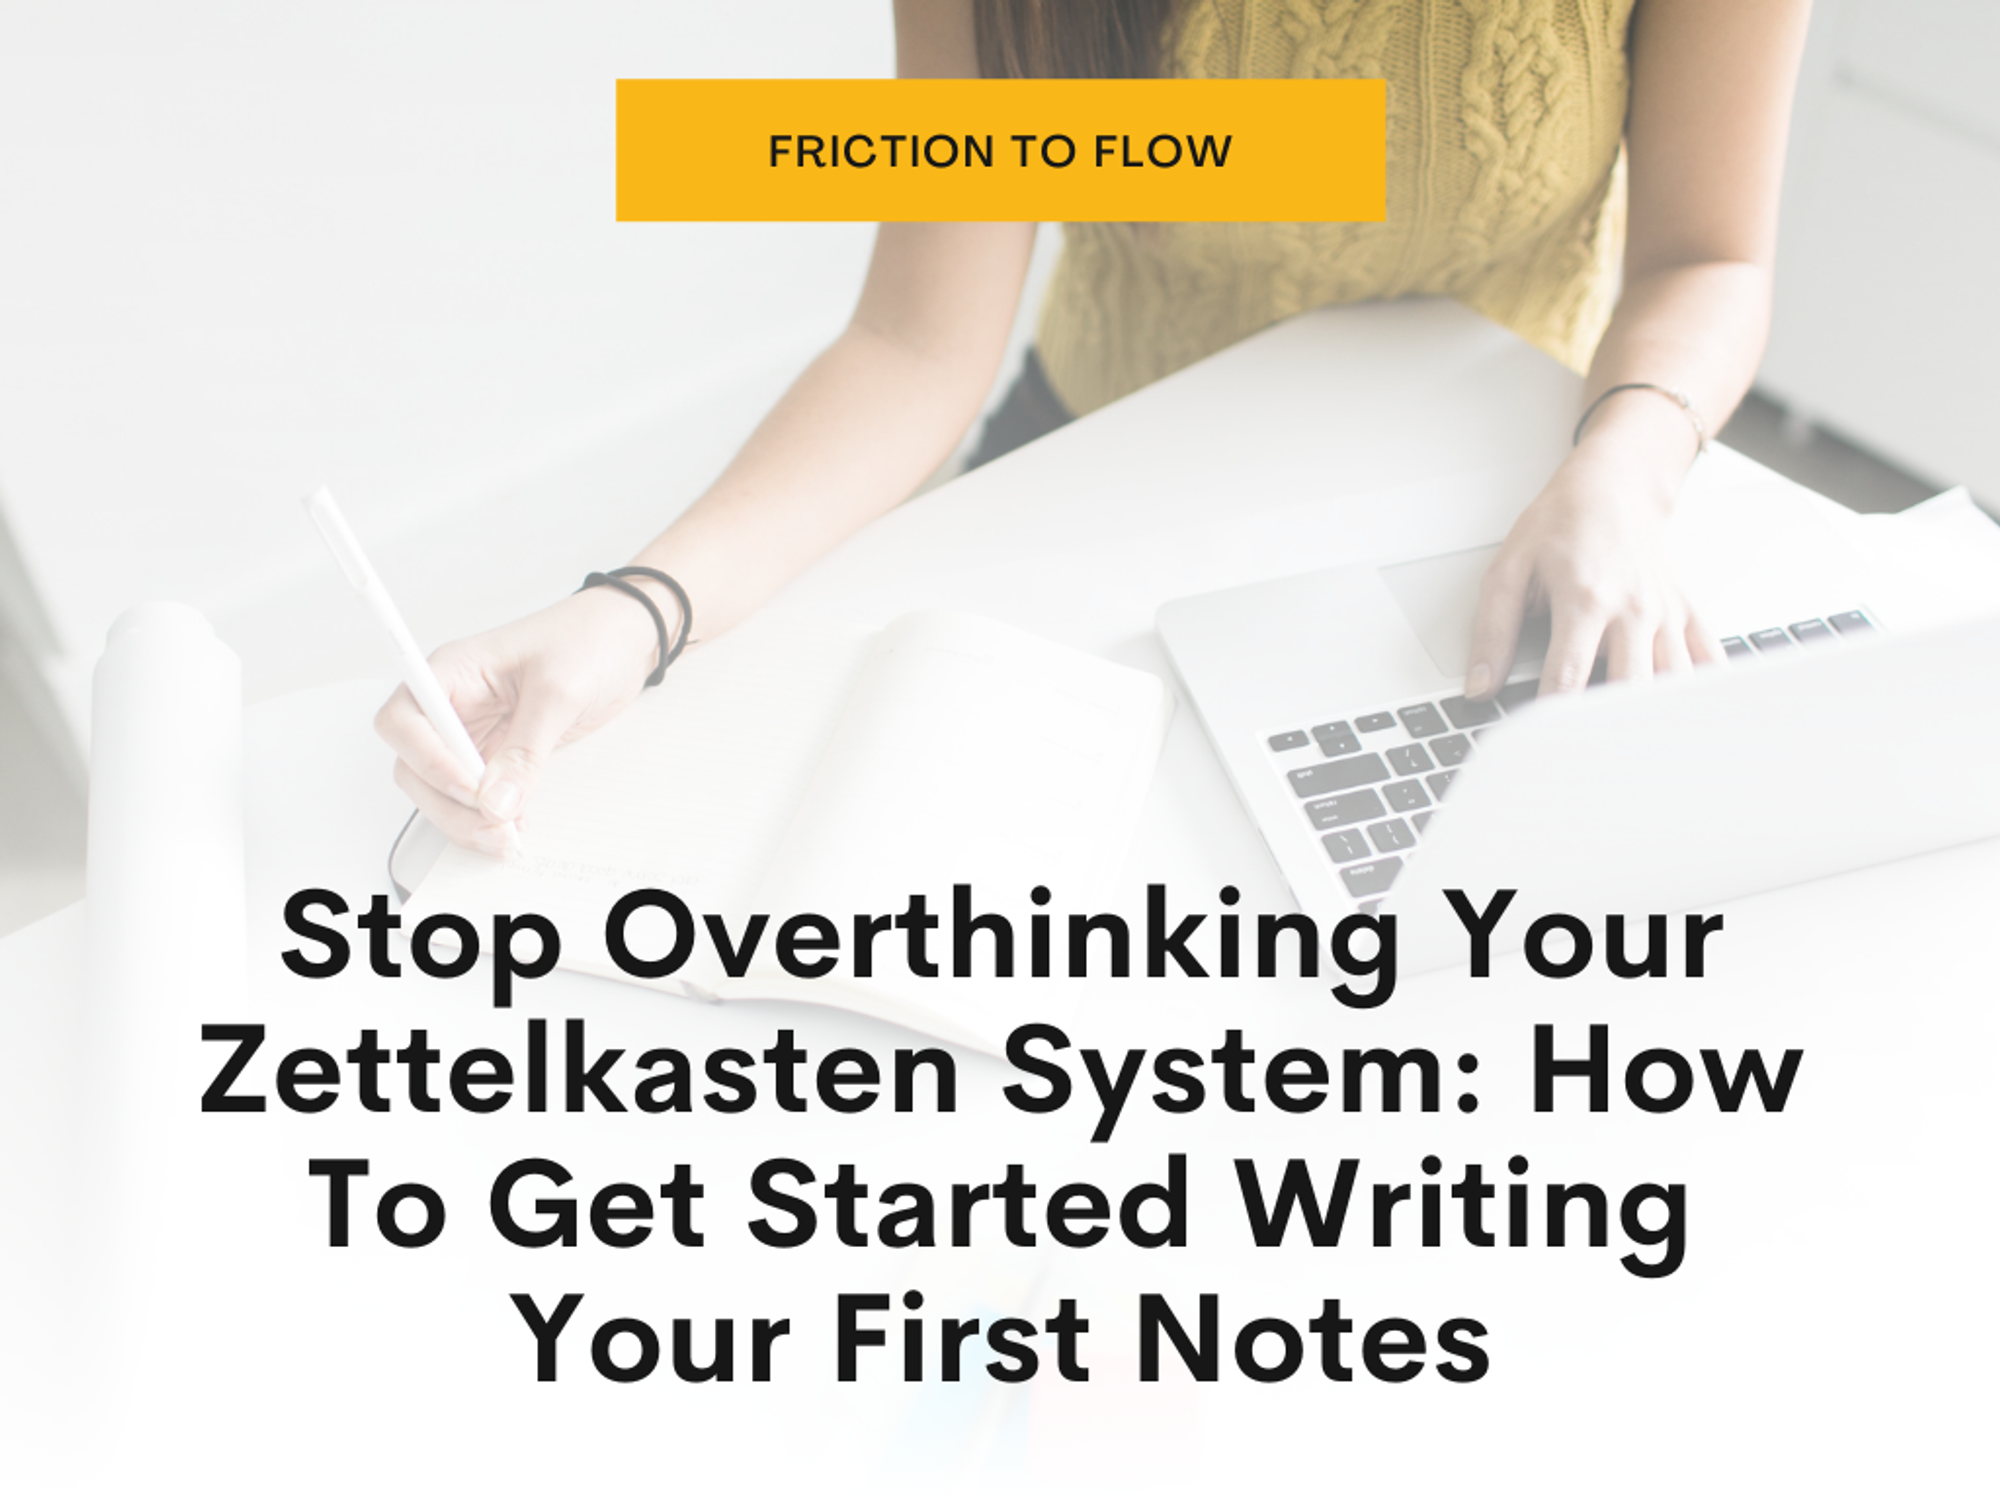 Stop Overthinking Your Zettelkasten System: How To Get Started Writing Your First Notes